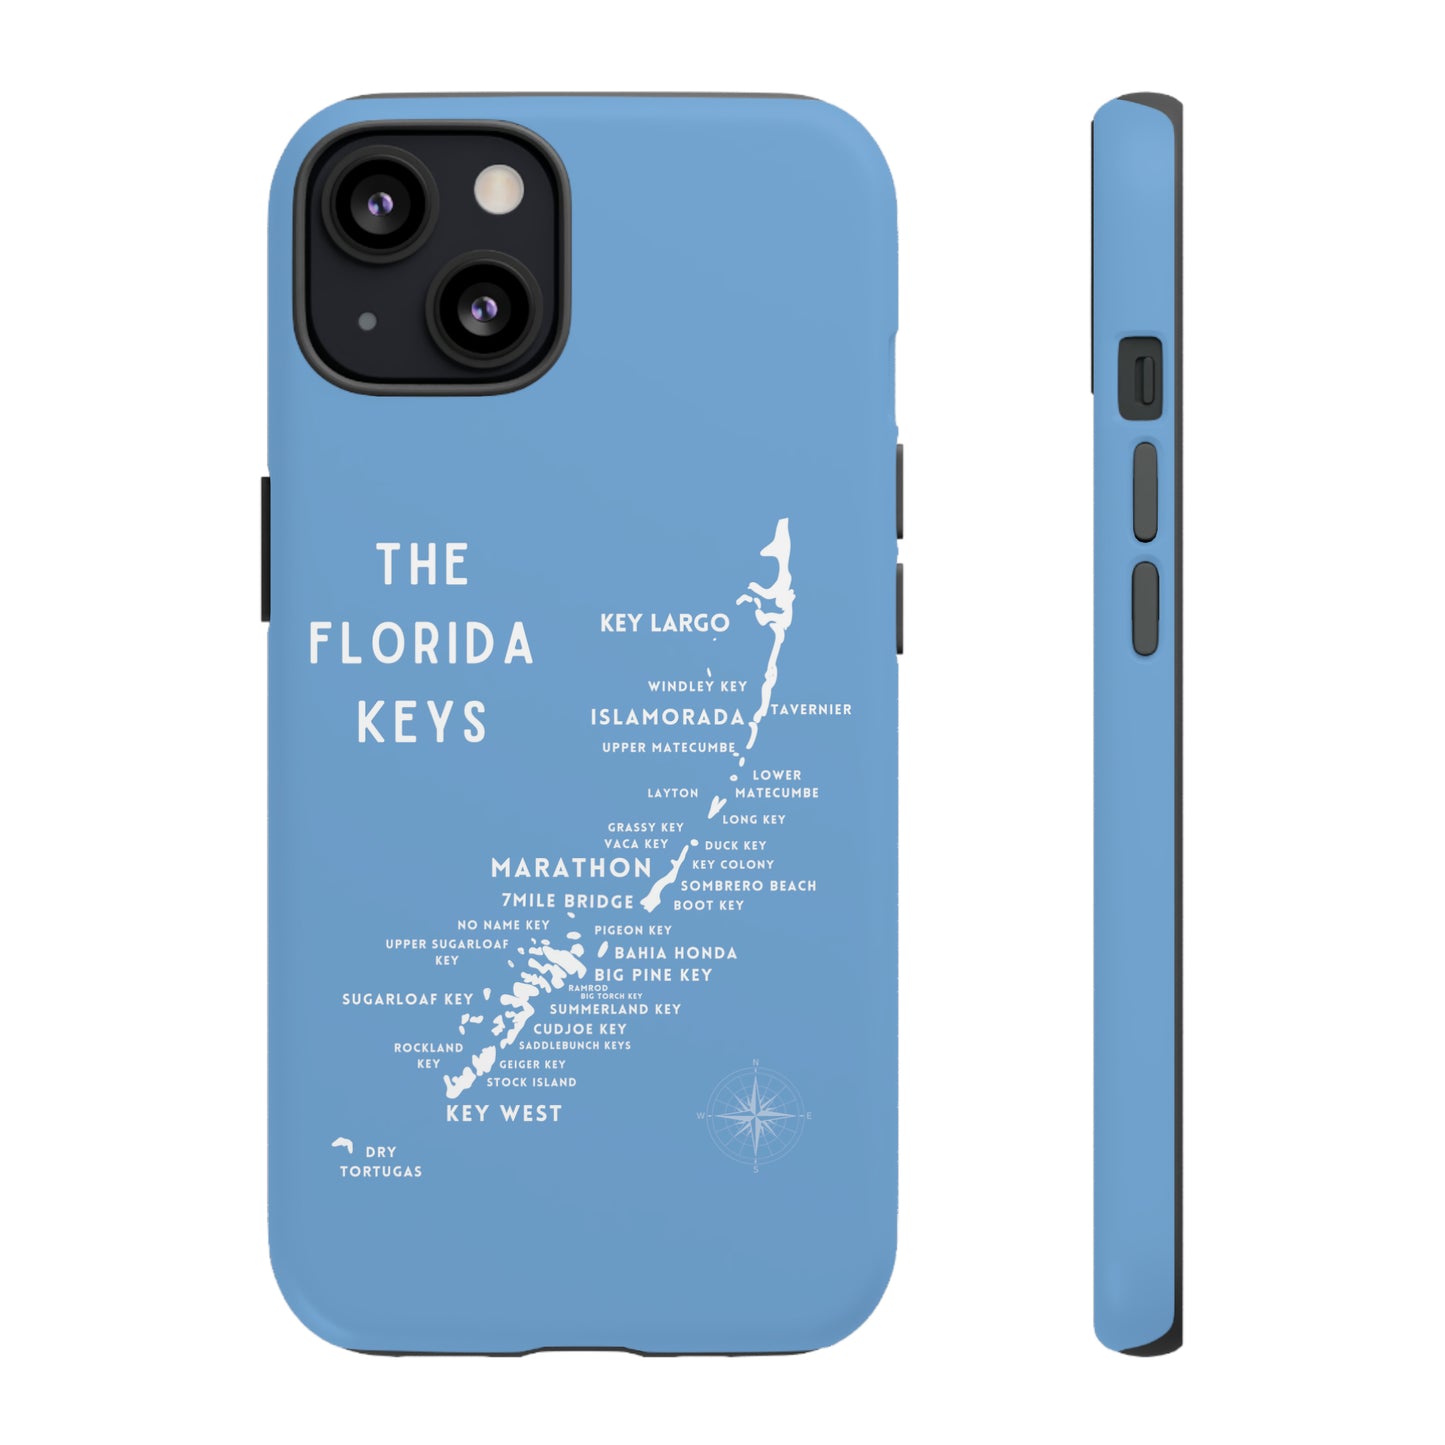 Florida keys map - iPhone Samsung pixel phone Case blue with white